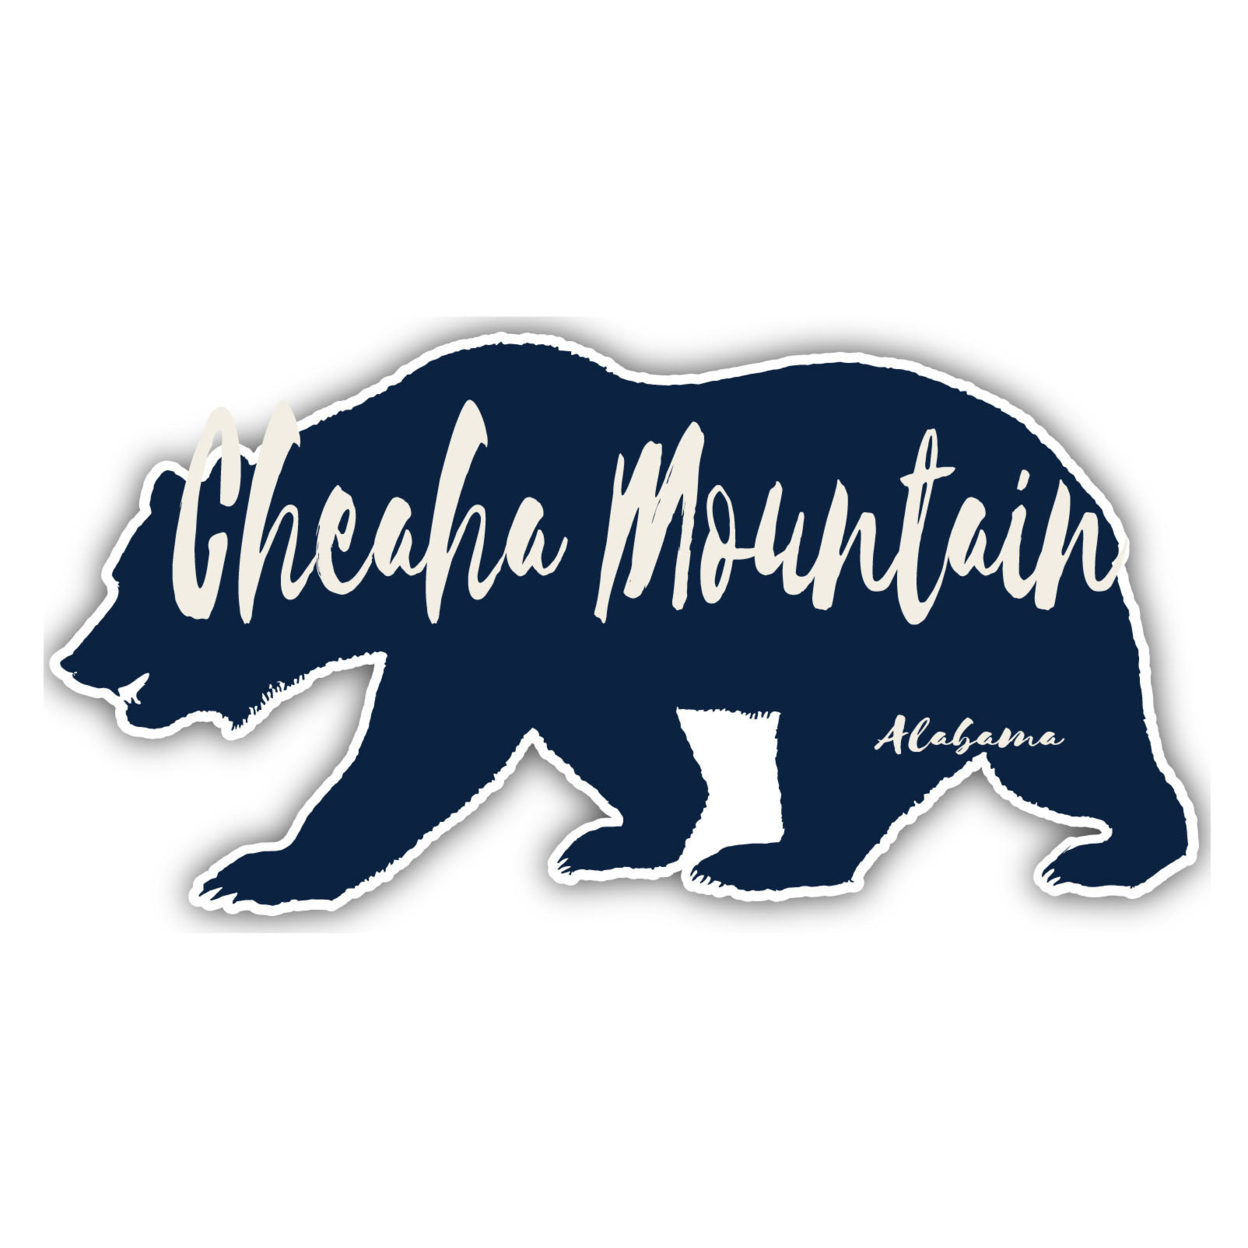 Cheaha Mountain Alabama Souvenir Decorative Stickers (Choose Theme And Size) - 4-Pack, 8-Inch, Tent